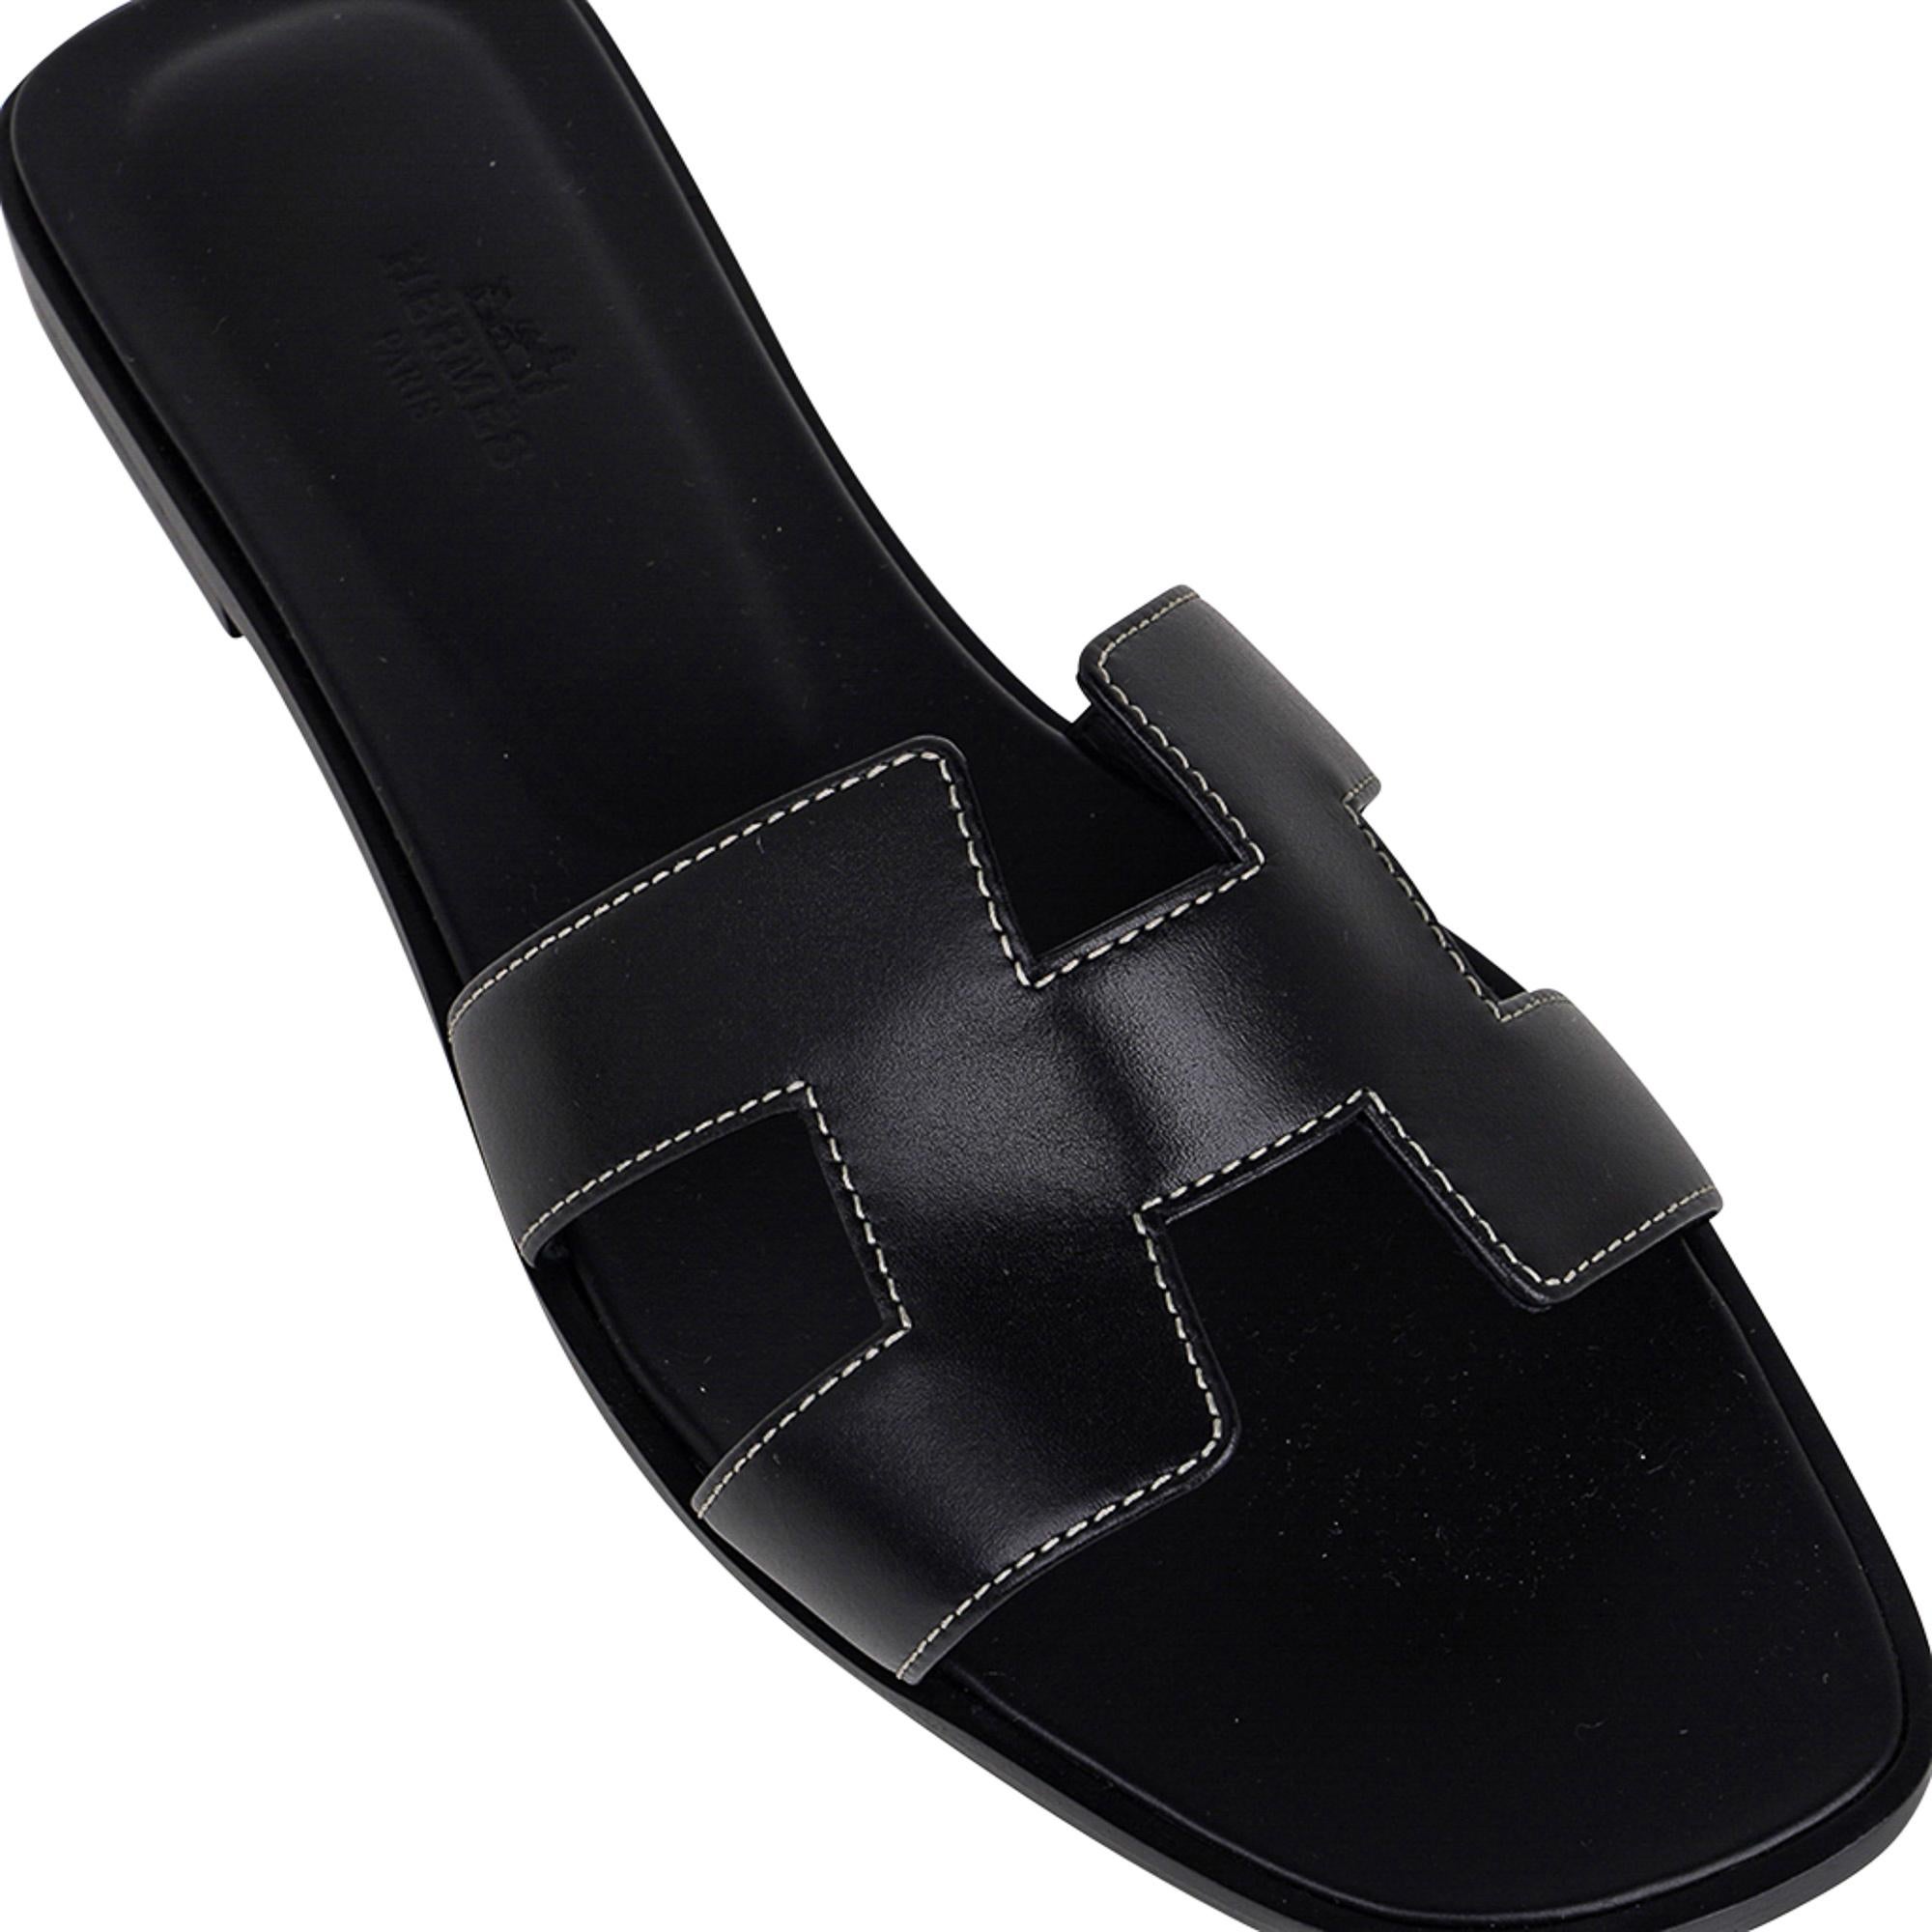 Hermes Oran Sandal Black Calfskin White Top Stitch Flat Shoes 37 / 7 In New Condition For Sale In Miami, FL